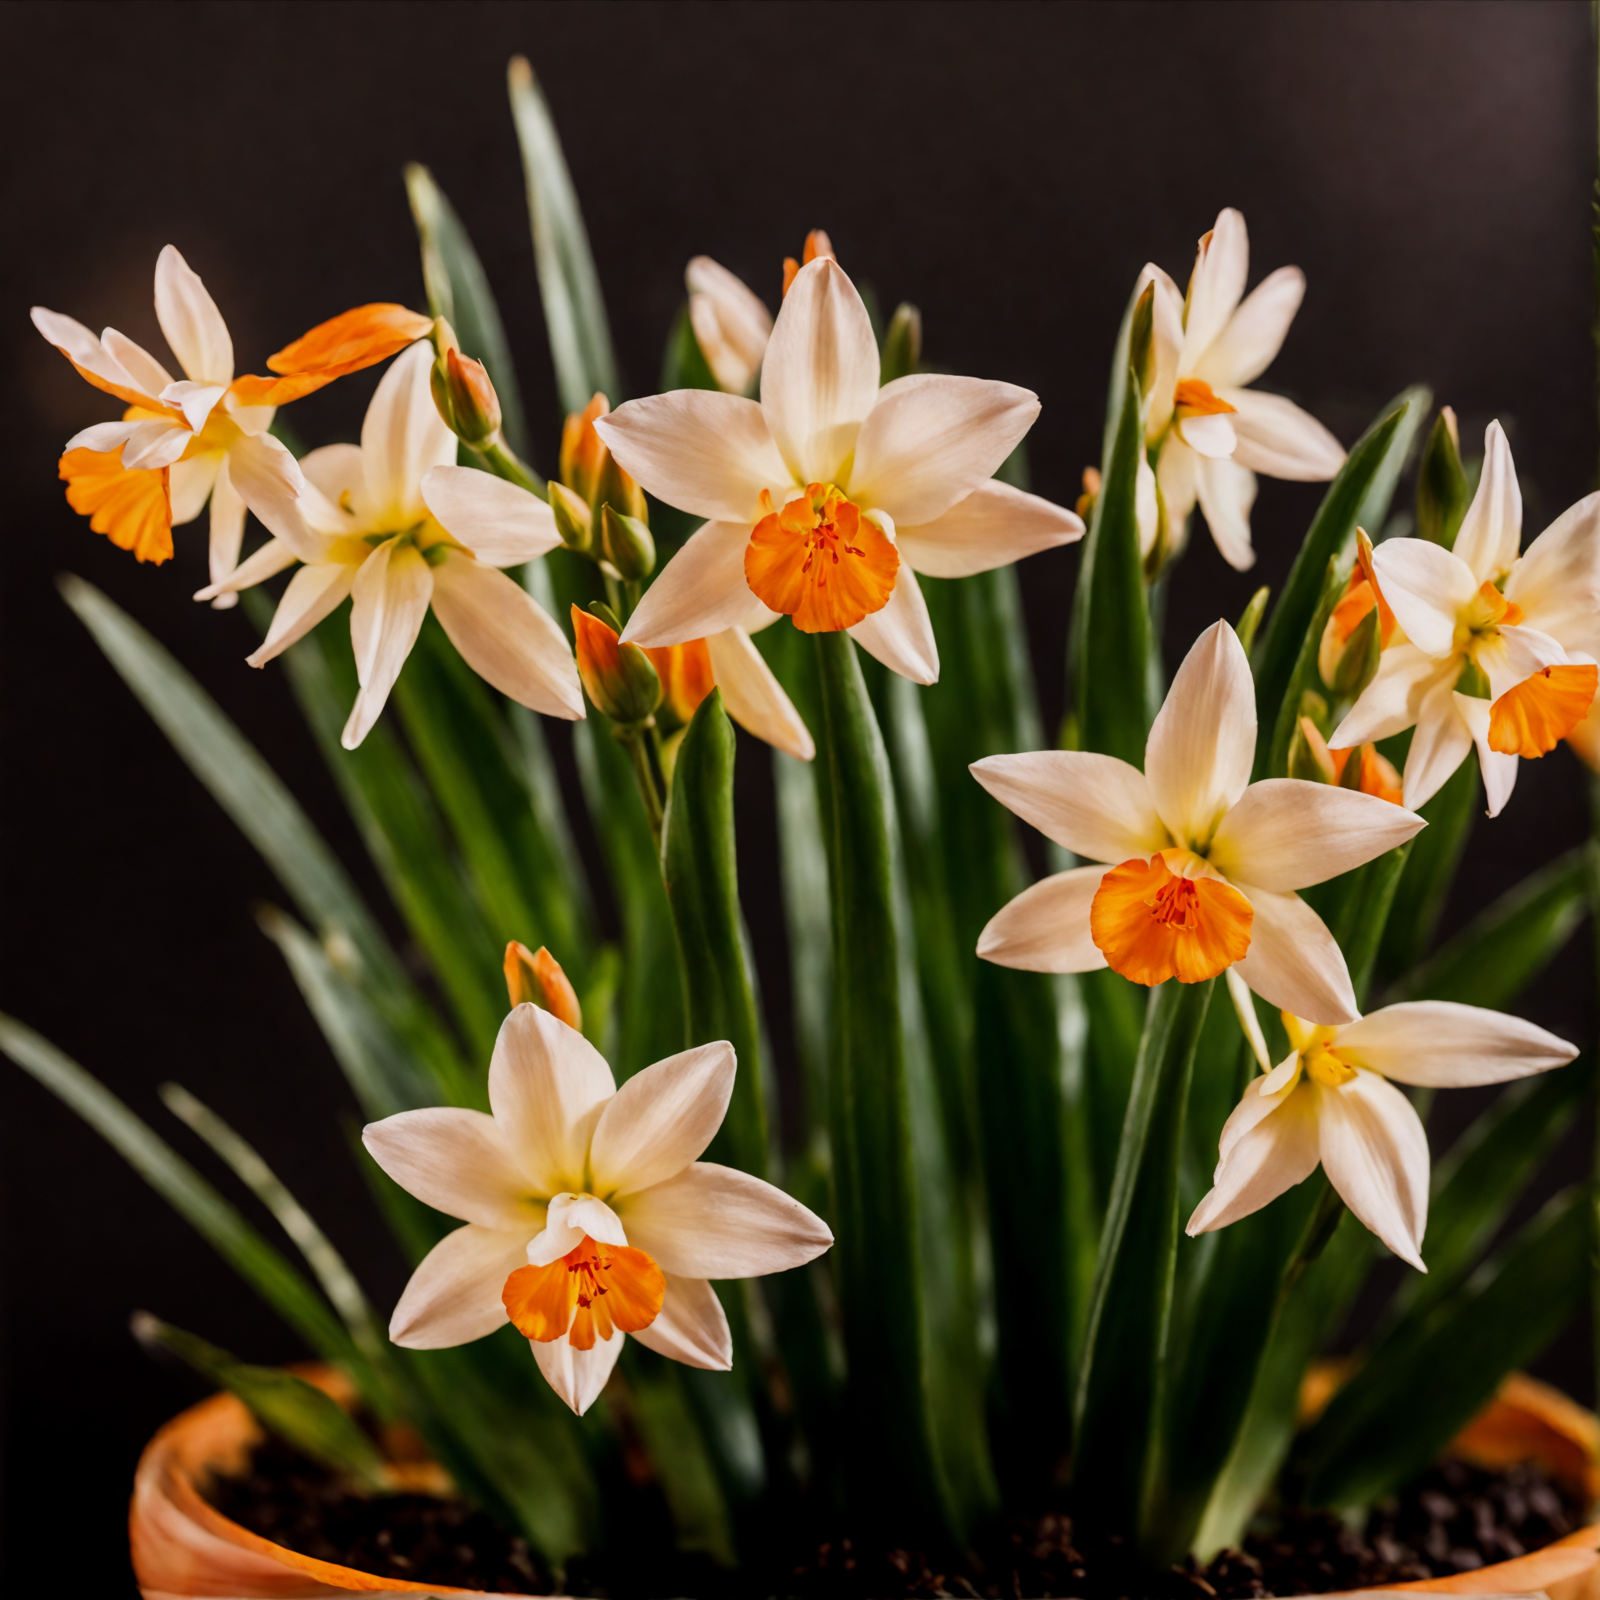 Narcissus tazetta flowers, white with orange centers, arranged in a bowl, with clear lighting against a dark background.